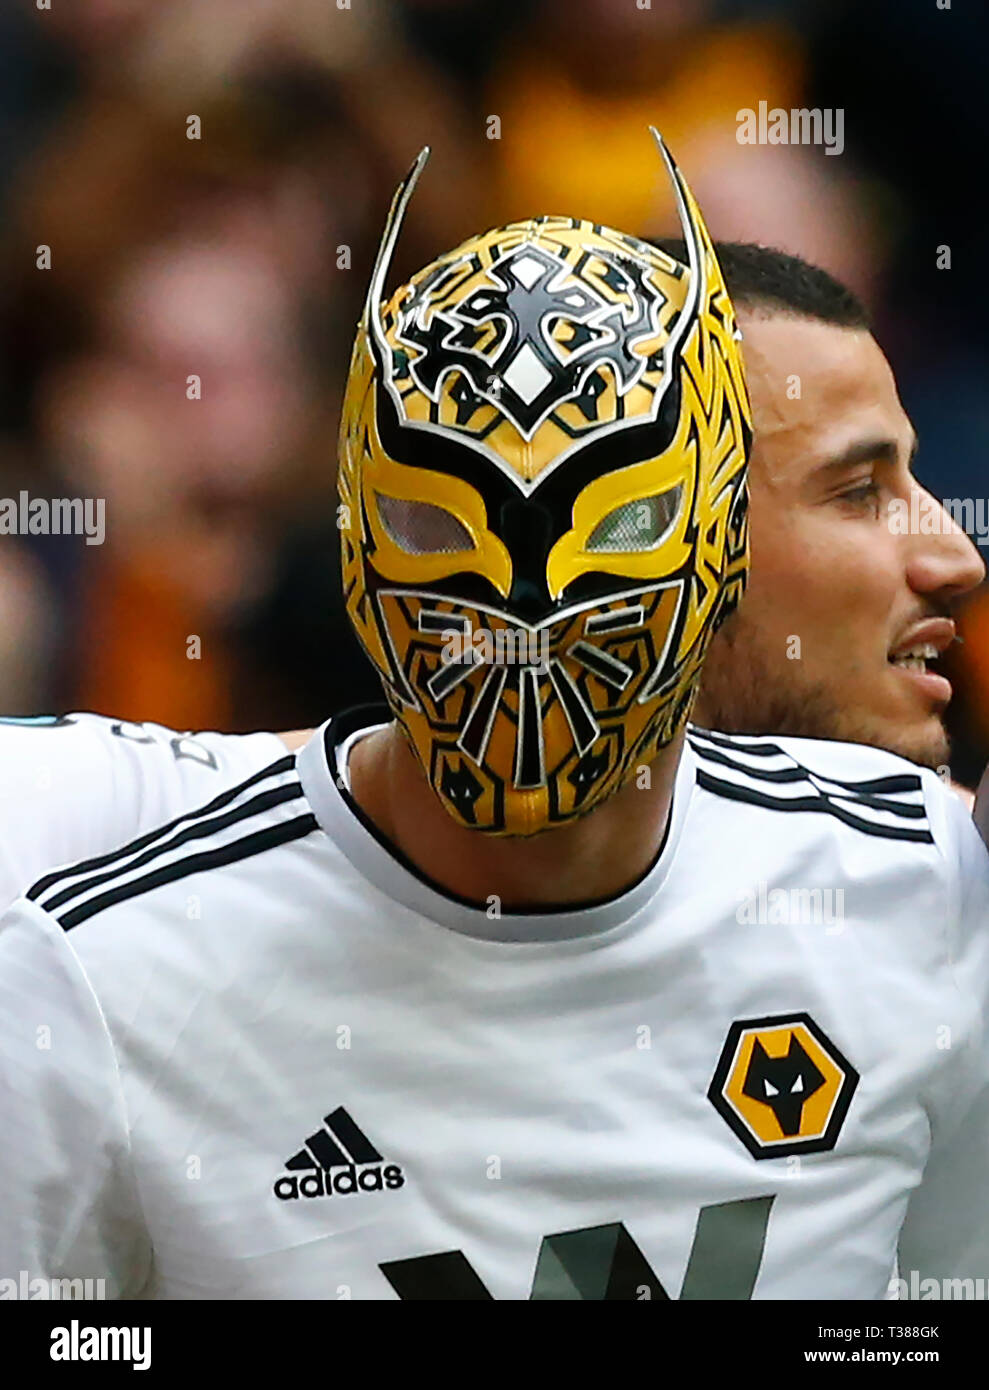 London, UK. 07th Apr, 2019. Wolverhampton Wanderers' Raul Jimenez  celebrates scoring his sides second goal with a Wolves Mask during The FA  Emirates Cup Semi-Final match between Watford and Wolverhampton Wanderers at